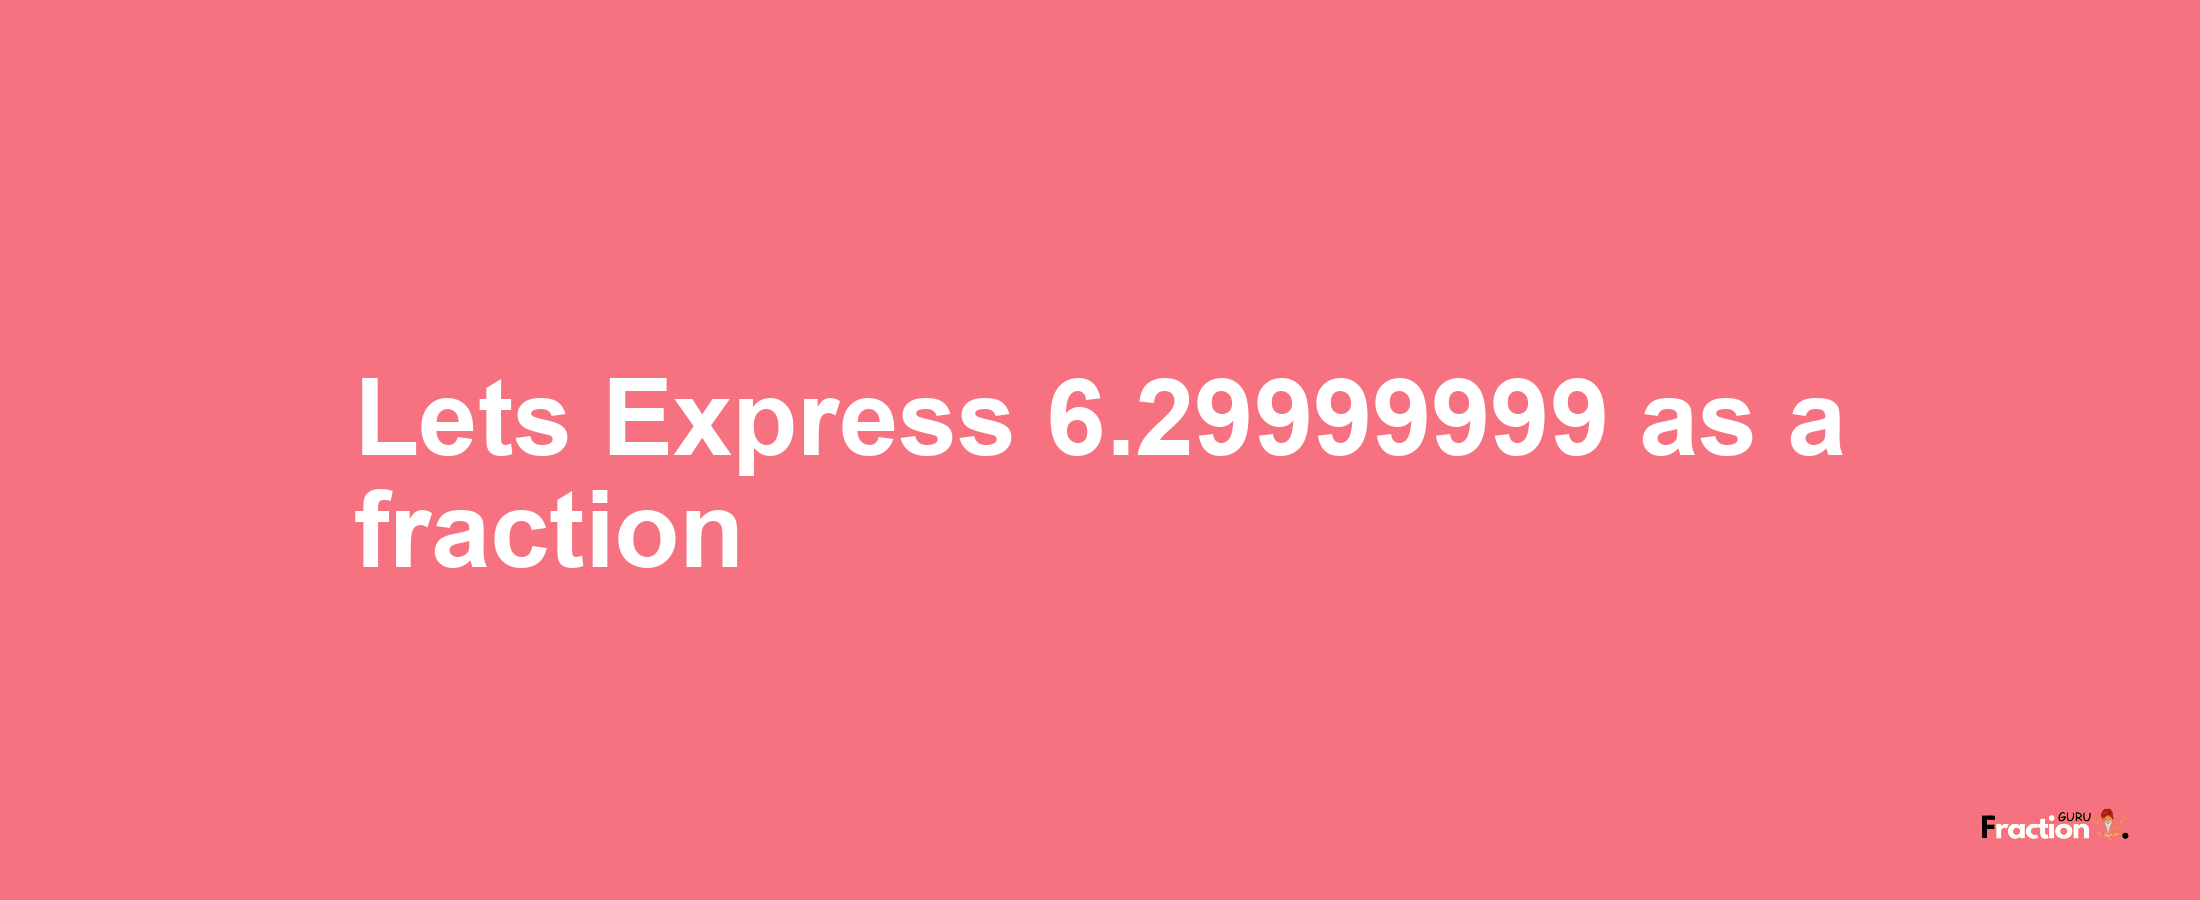 Lets Express 6.29999999 as afraction